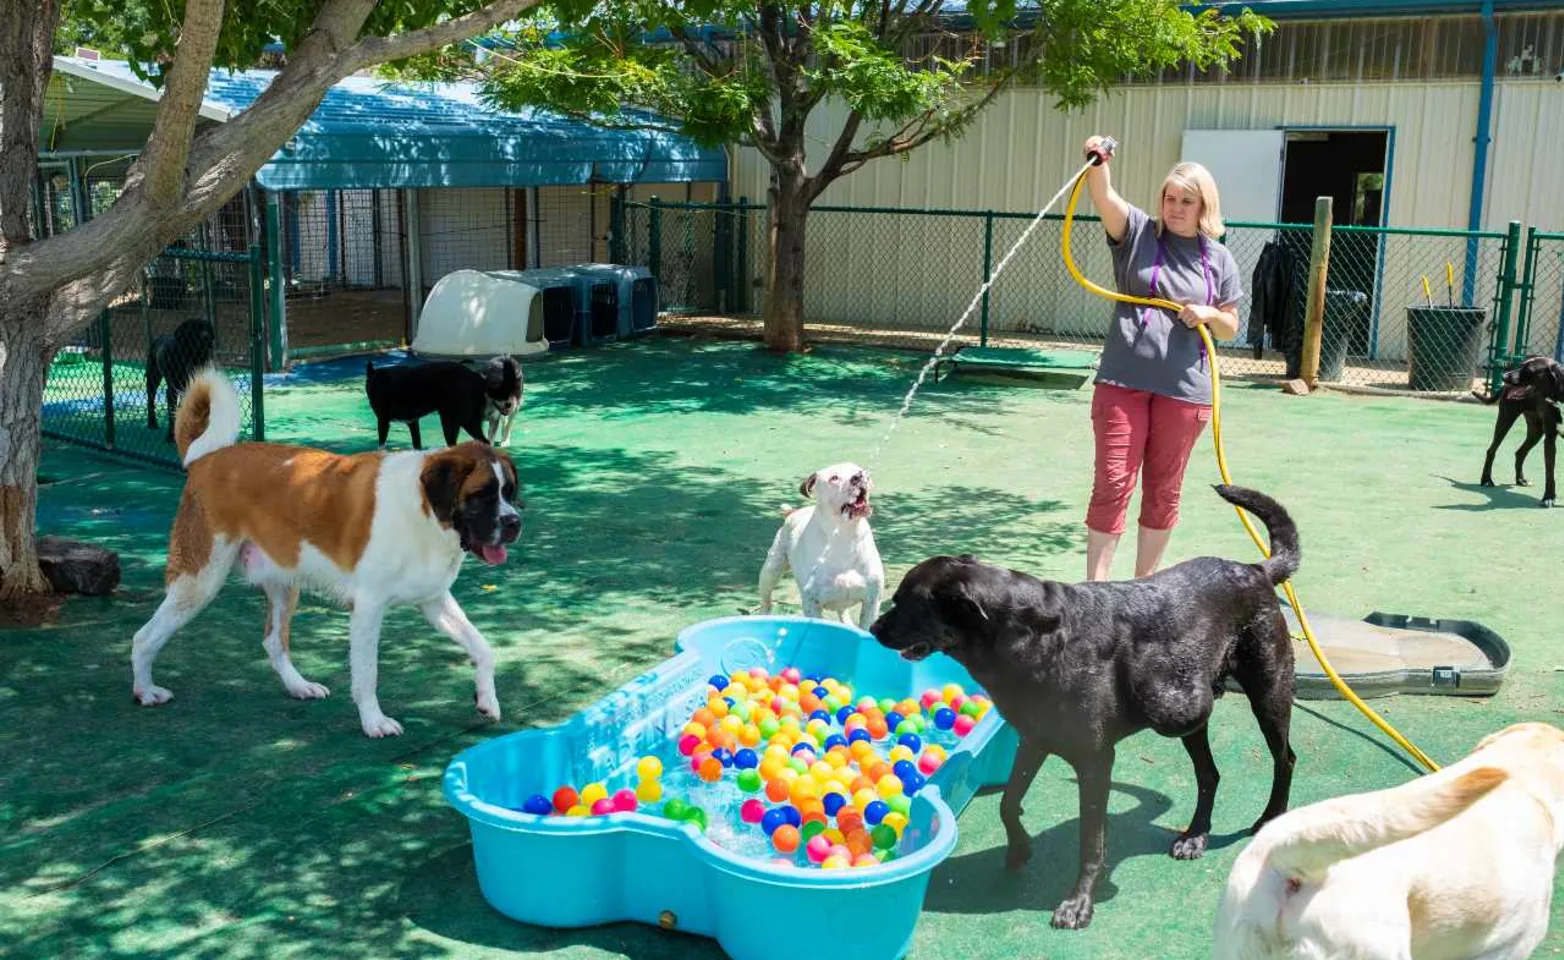 Bowhaus Colorado dog daycare staff playing with dogs in pool.